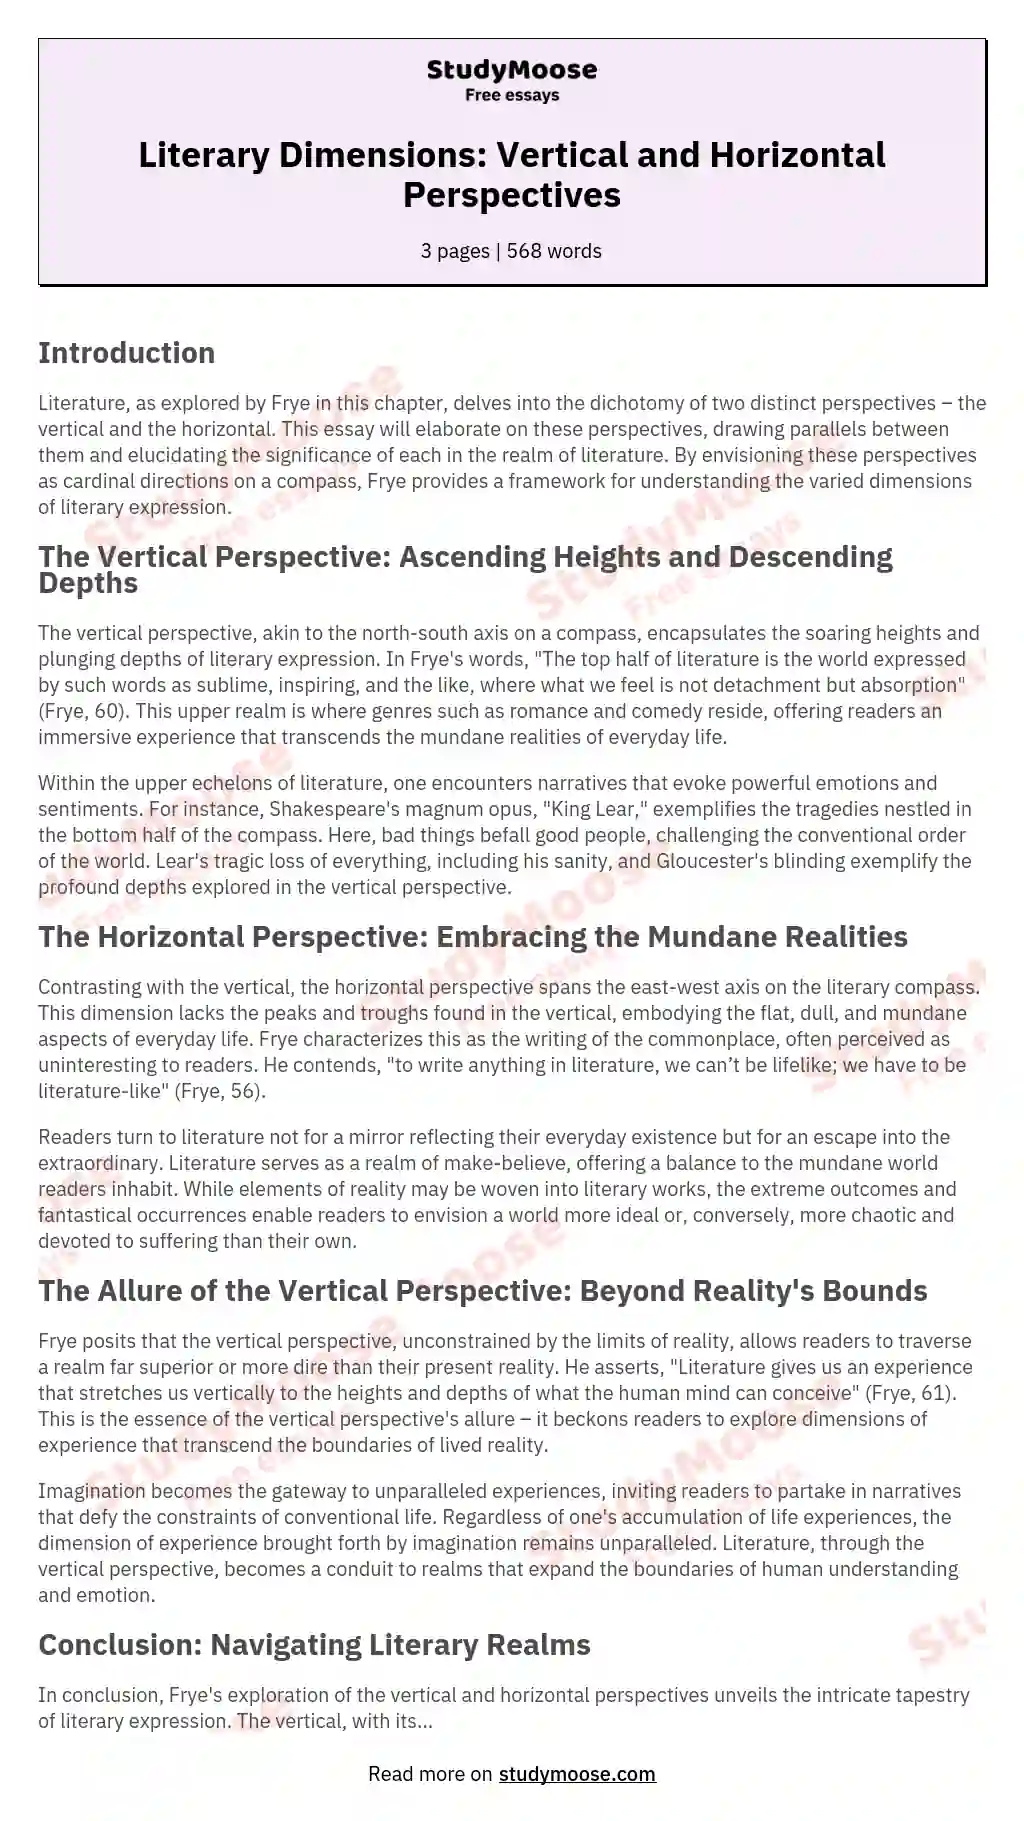 Literary Dimensions: Vertical and Horizontal Perspectives essay